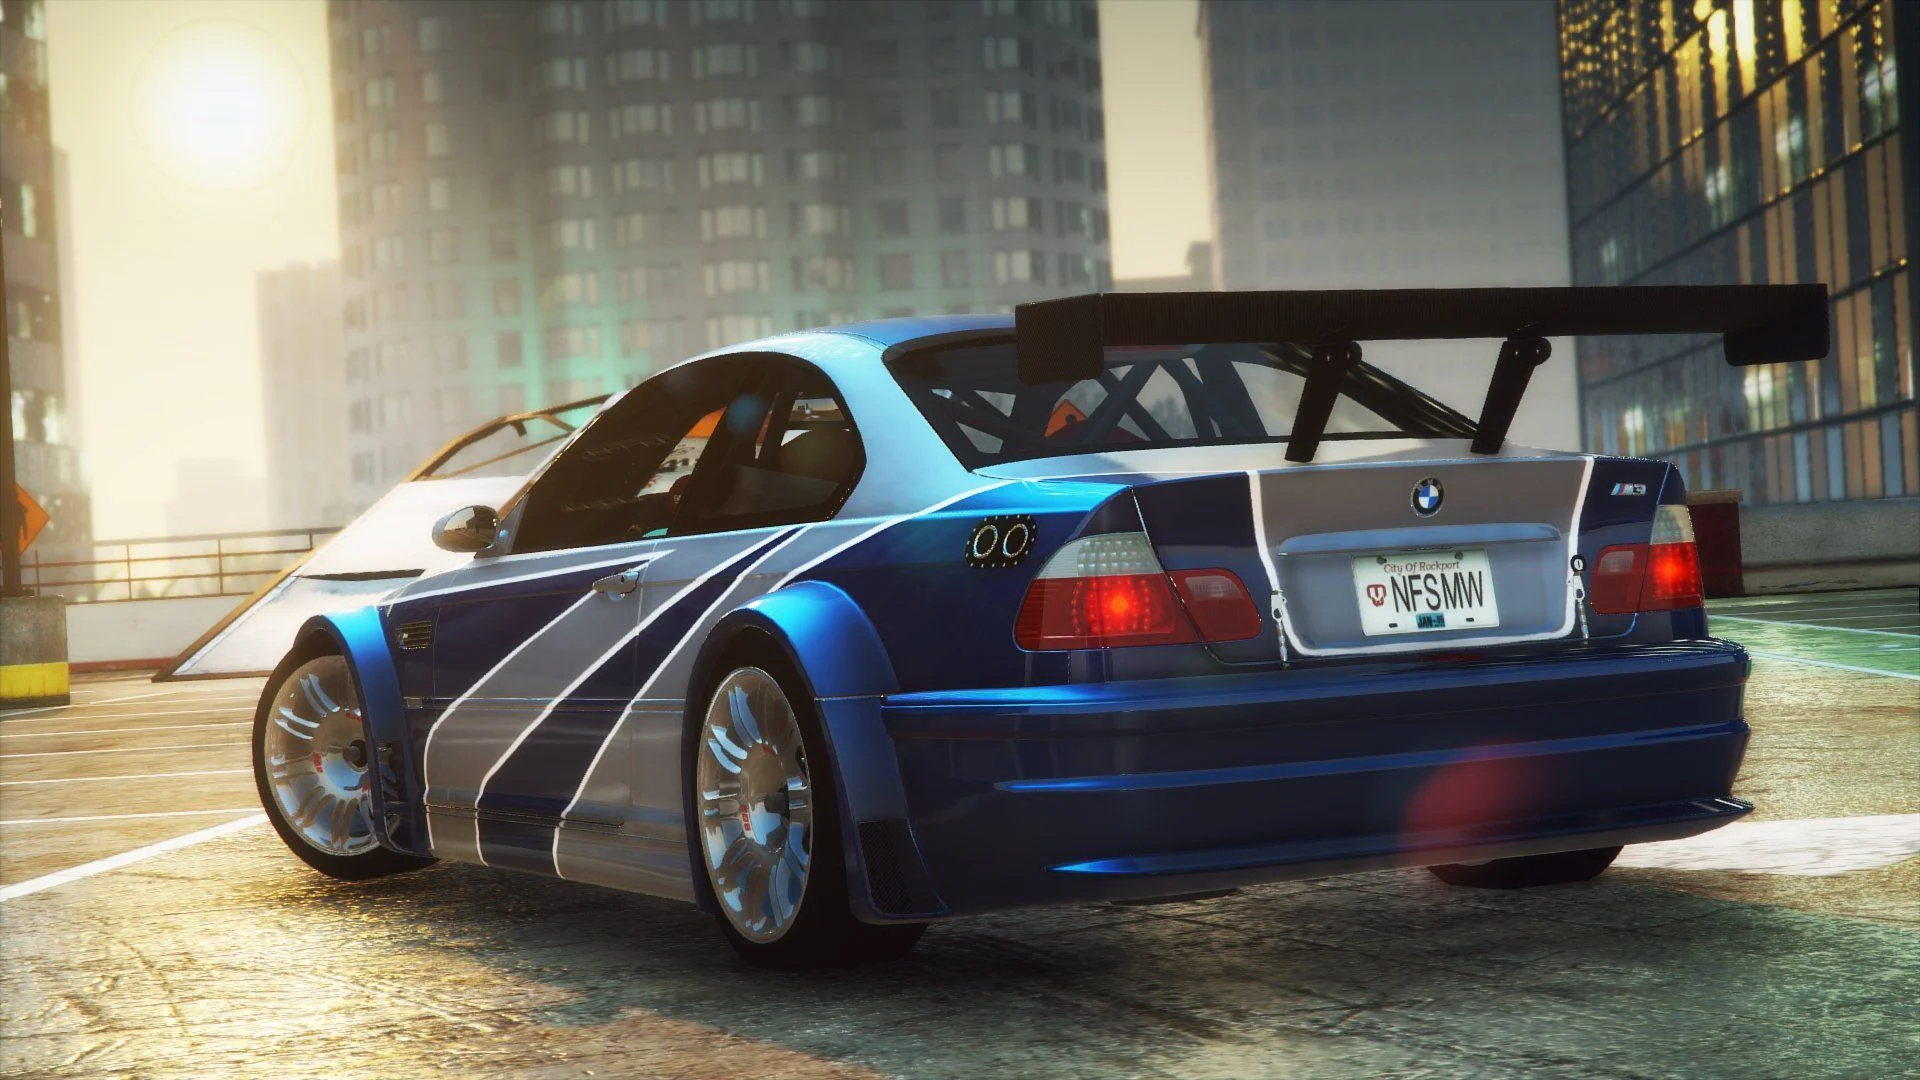 The legendary BMW from Need for Speed: Most Wanted has been added to Cyberpunk 2077